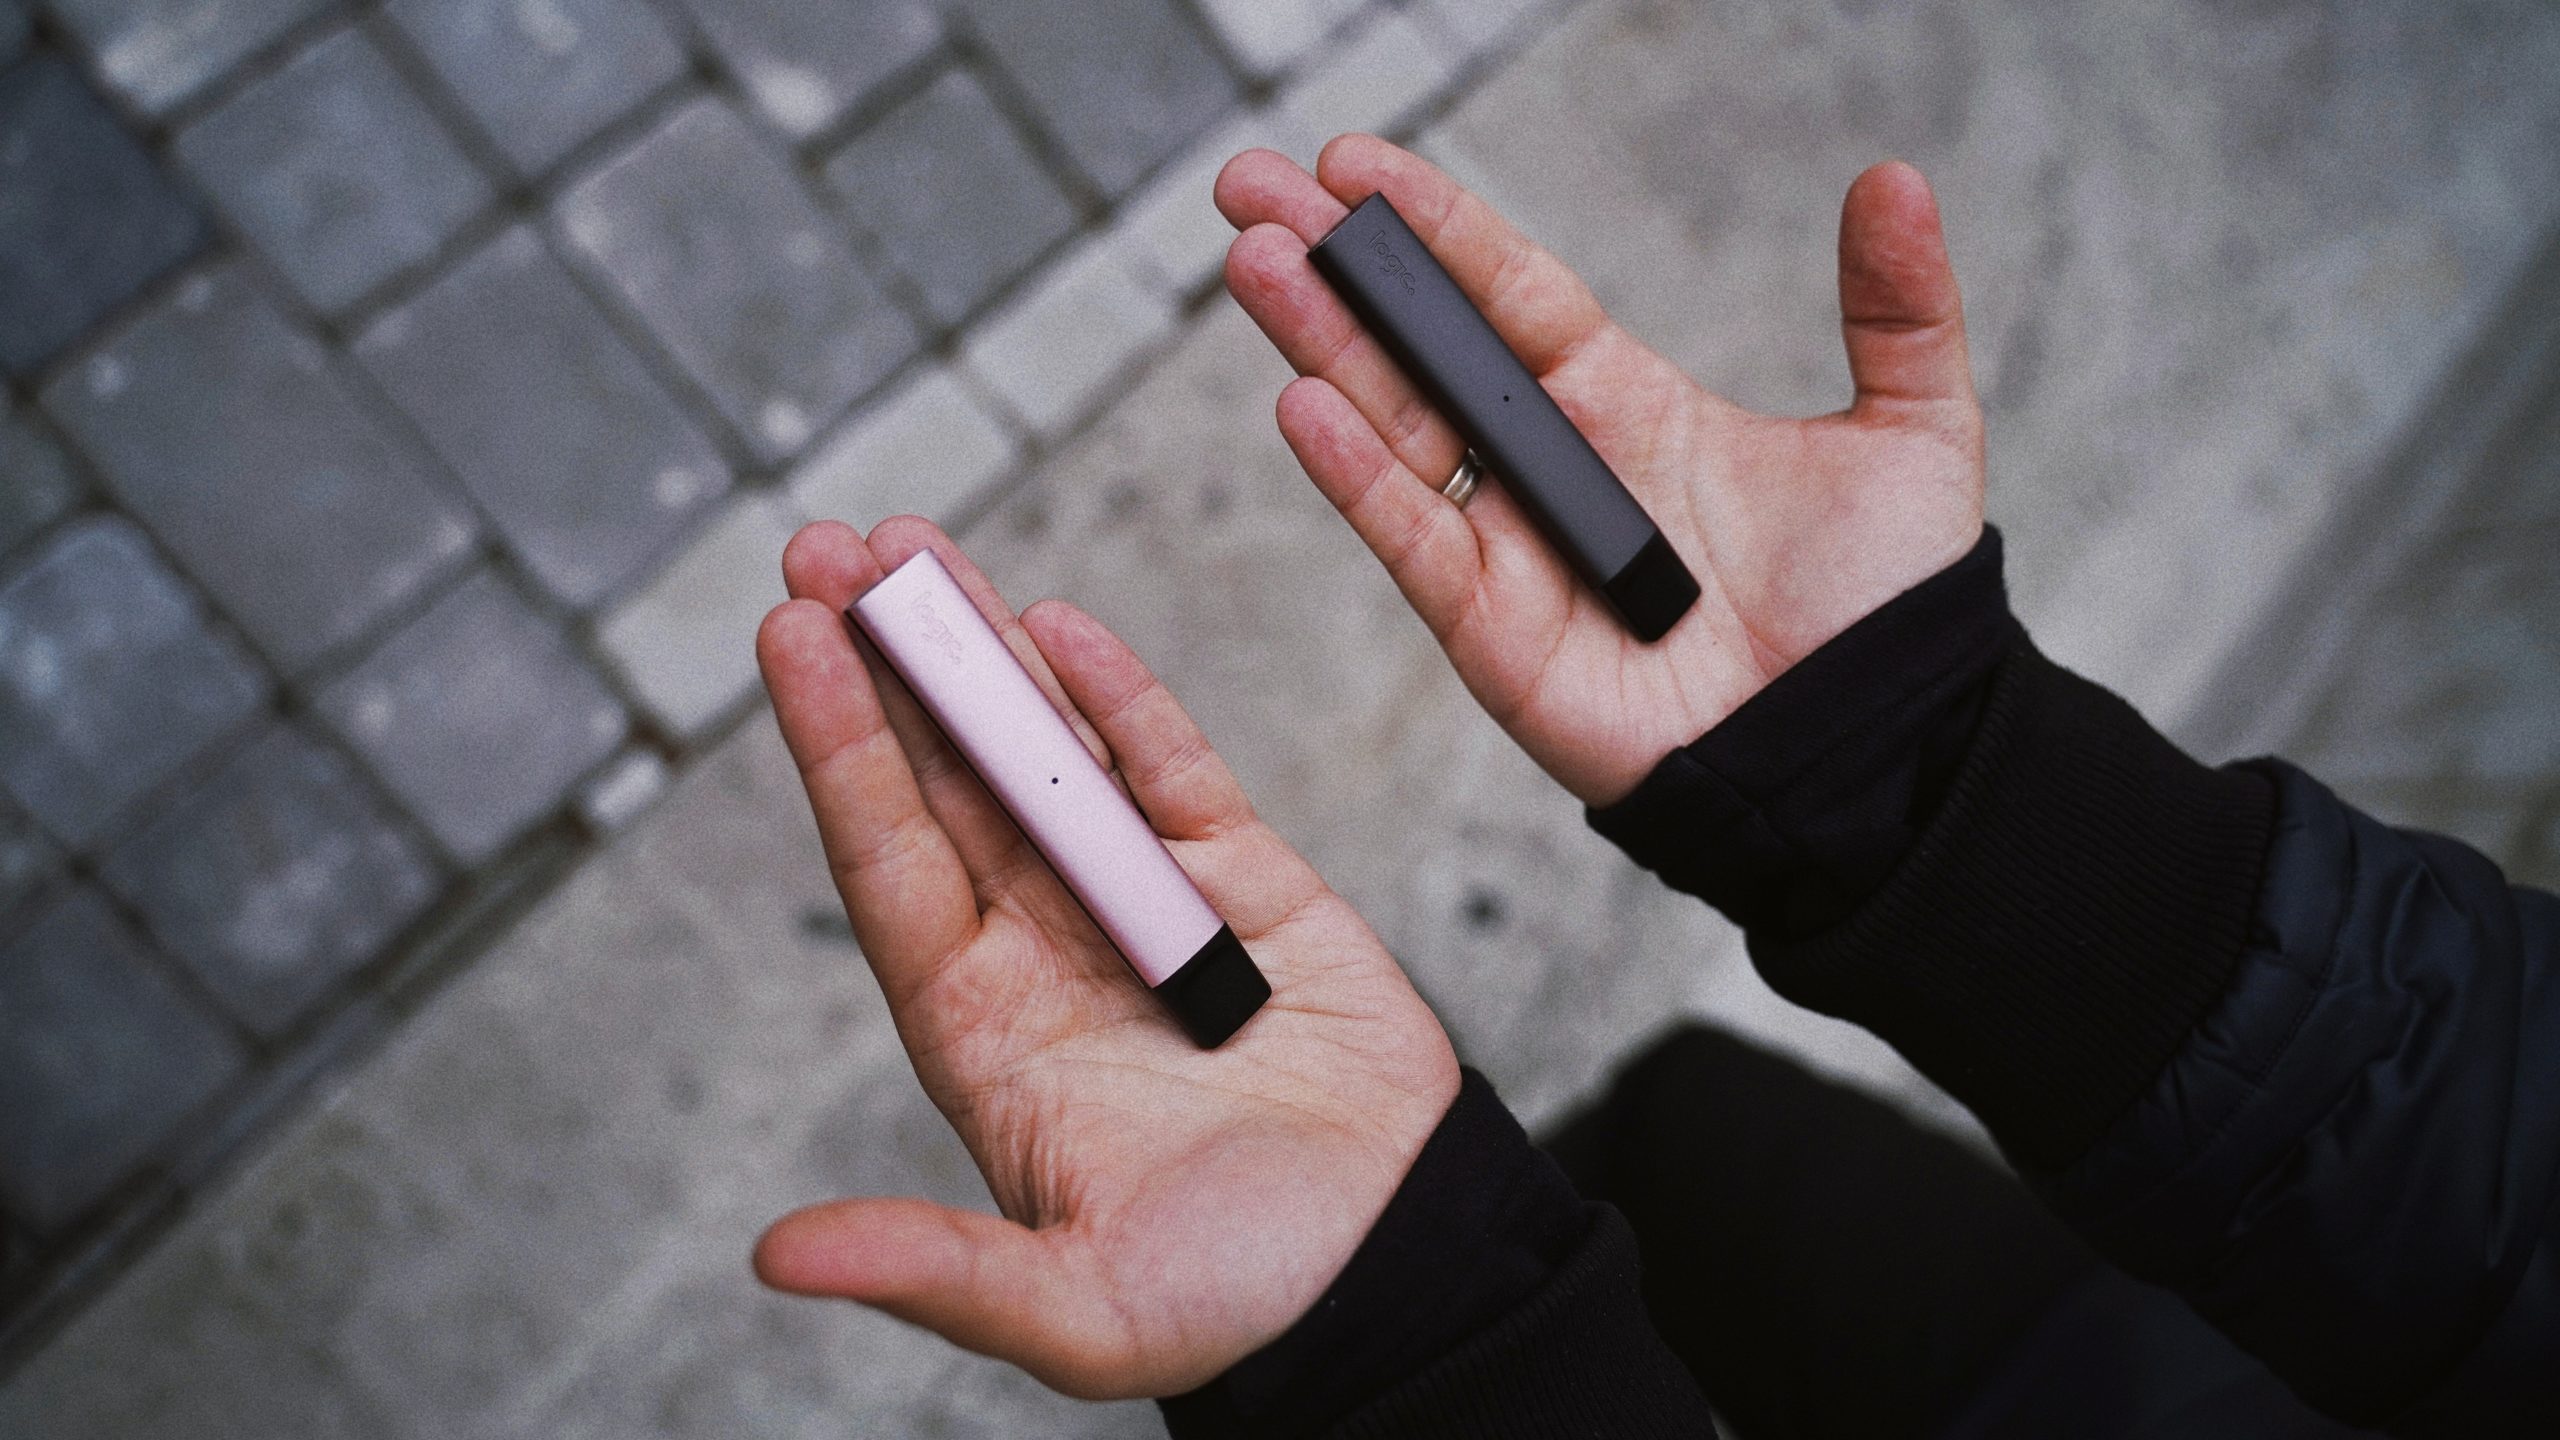 Two hands holding vape pens, one pink, one grey.